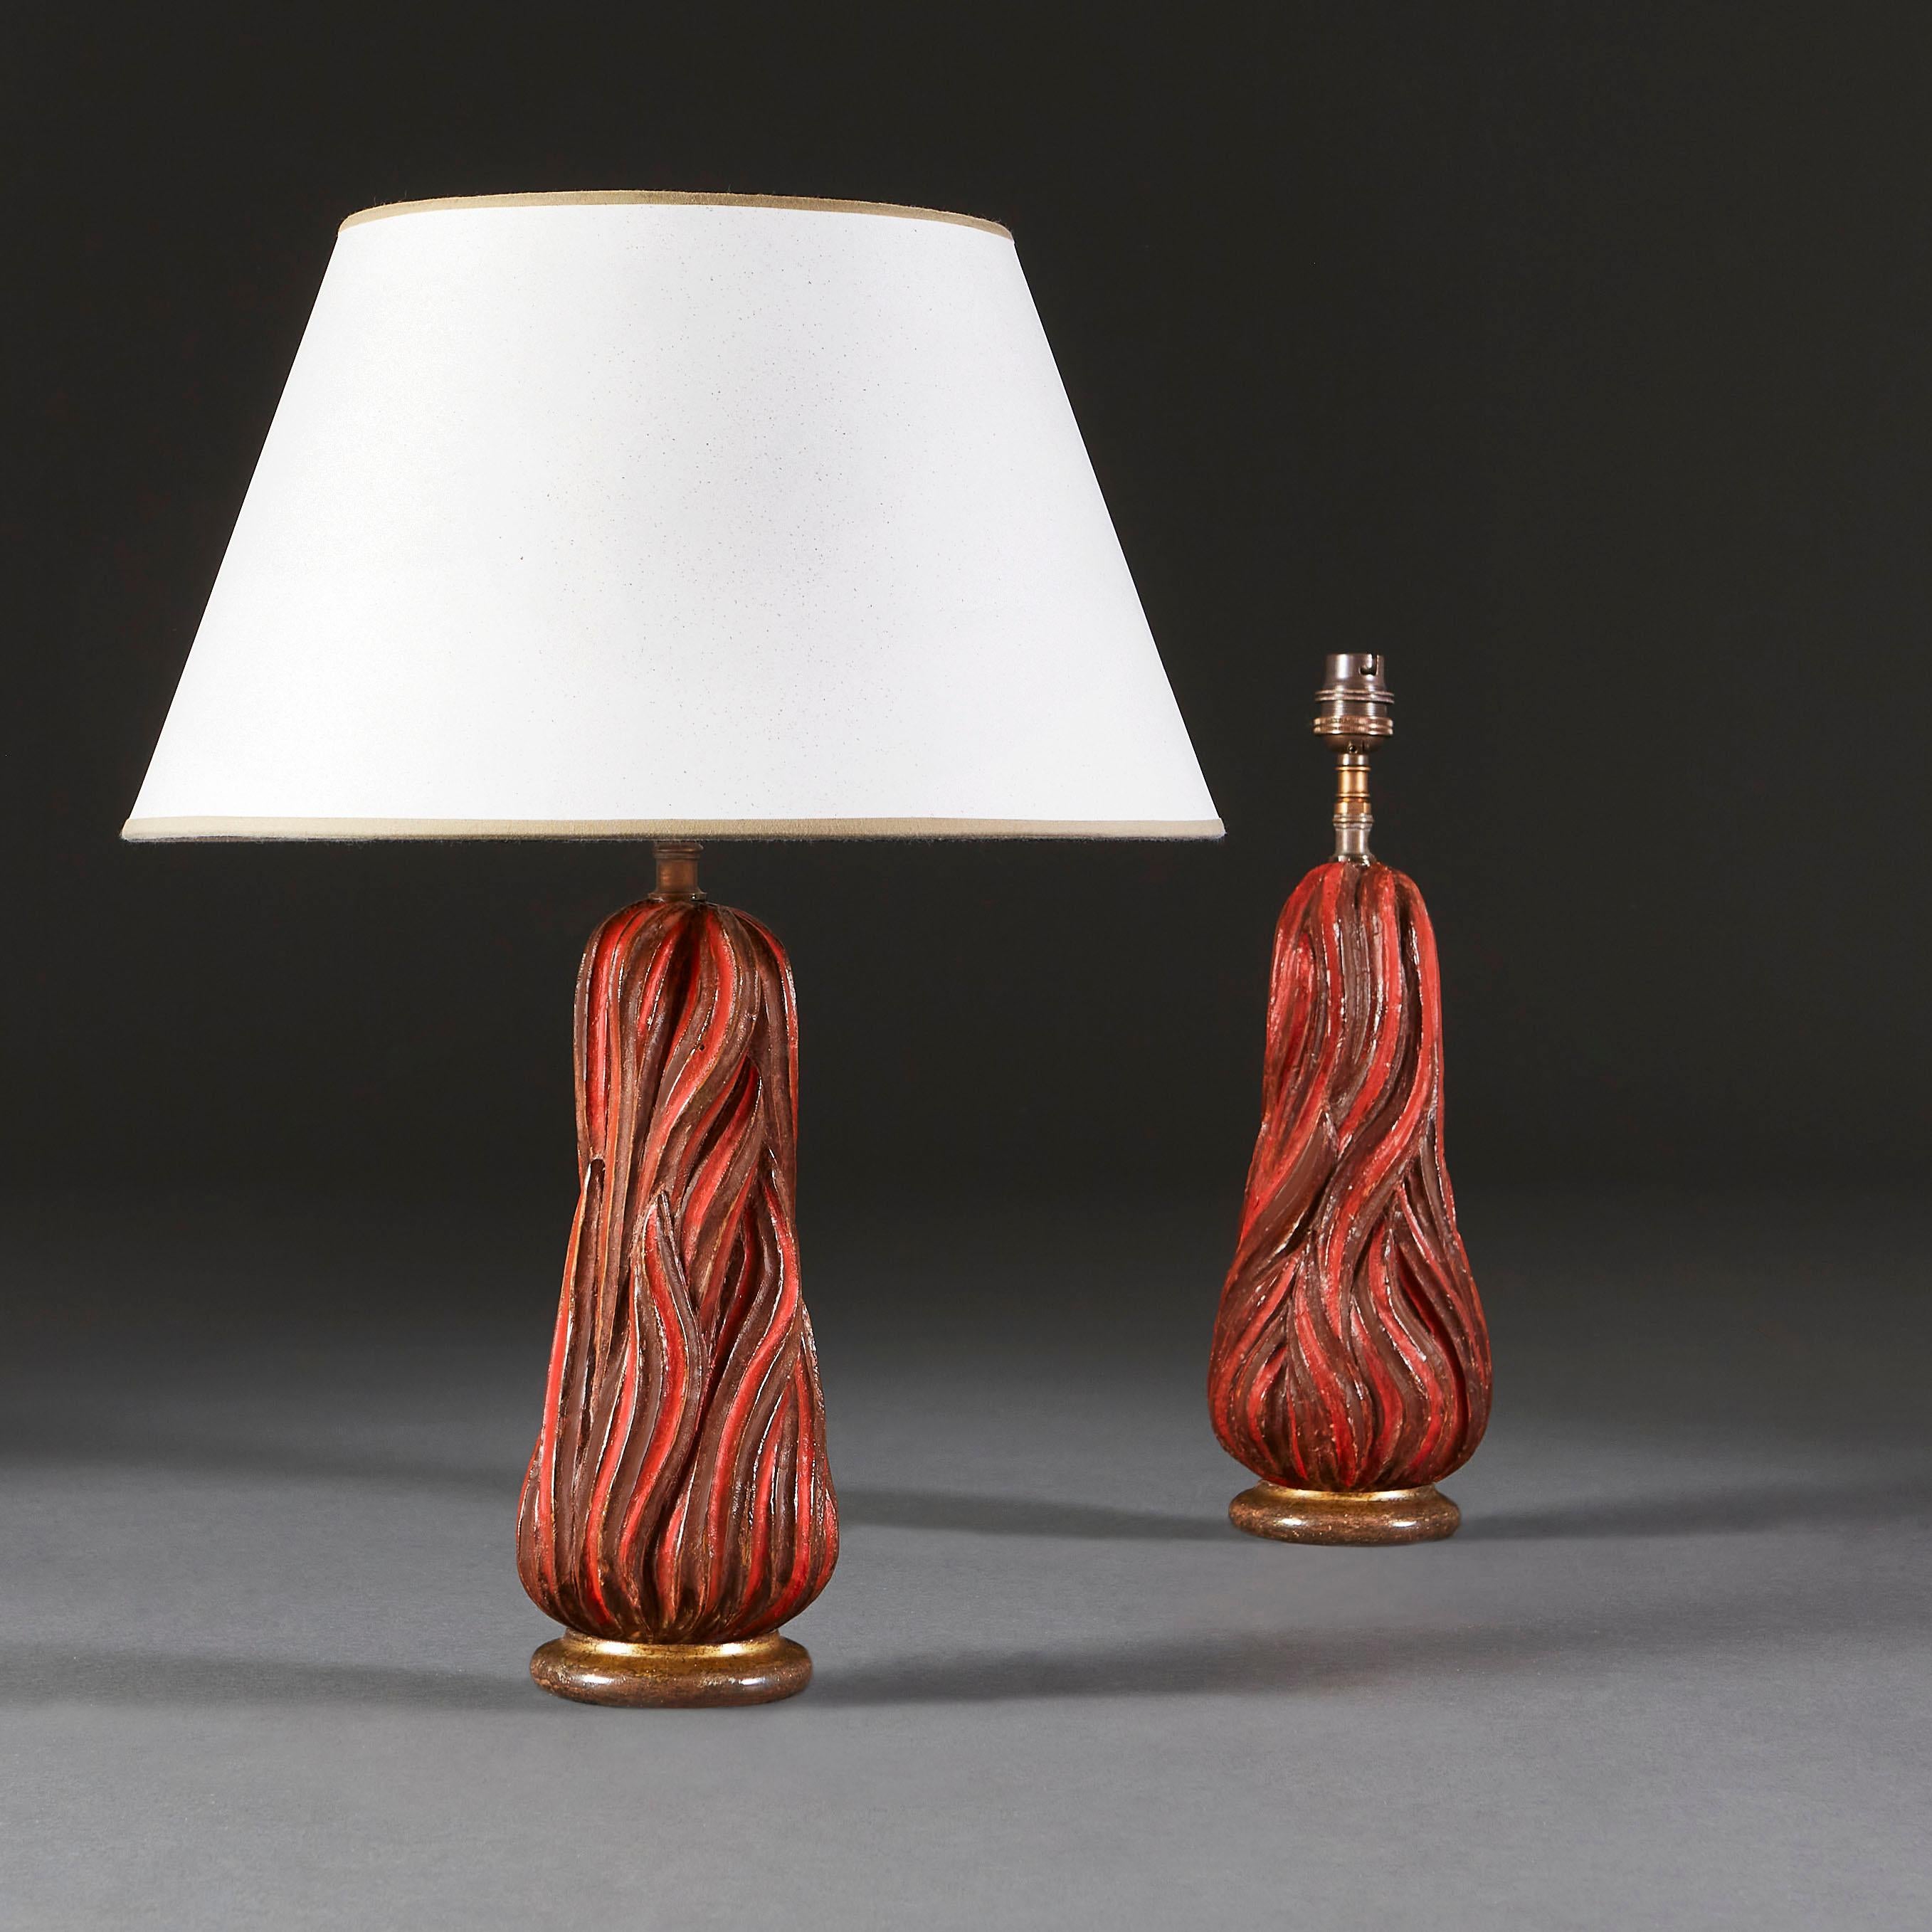 A pair of carved wooden finials in the shape of flames, painted red and now as lamps.

Currently wired for the UK. Please enquire for rewiring services.

Please note: Lampshades not included.